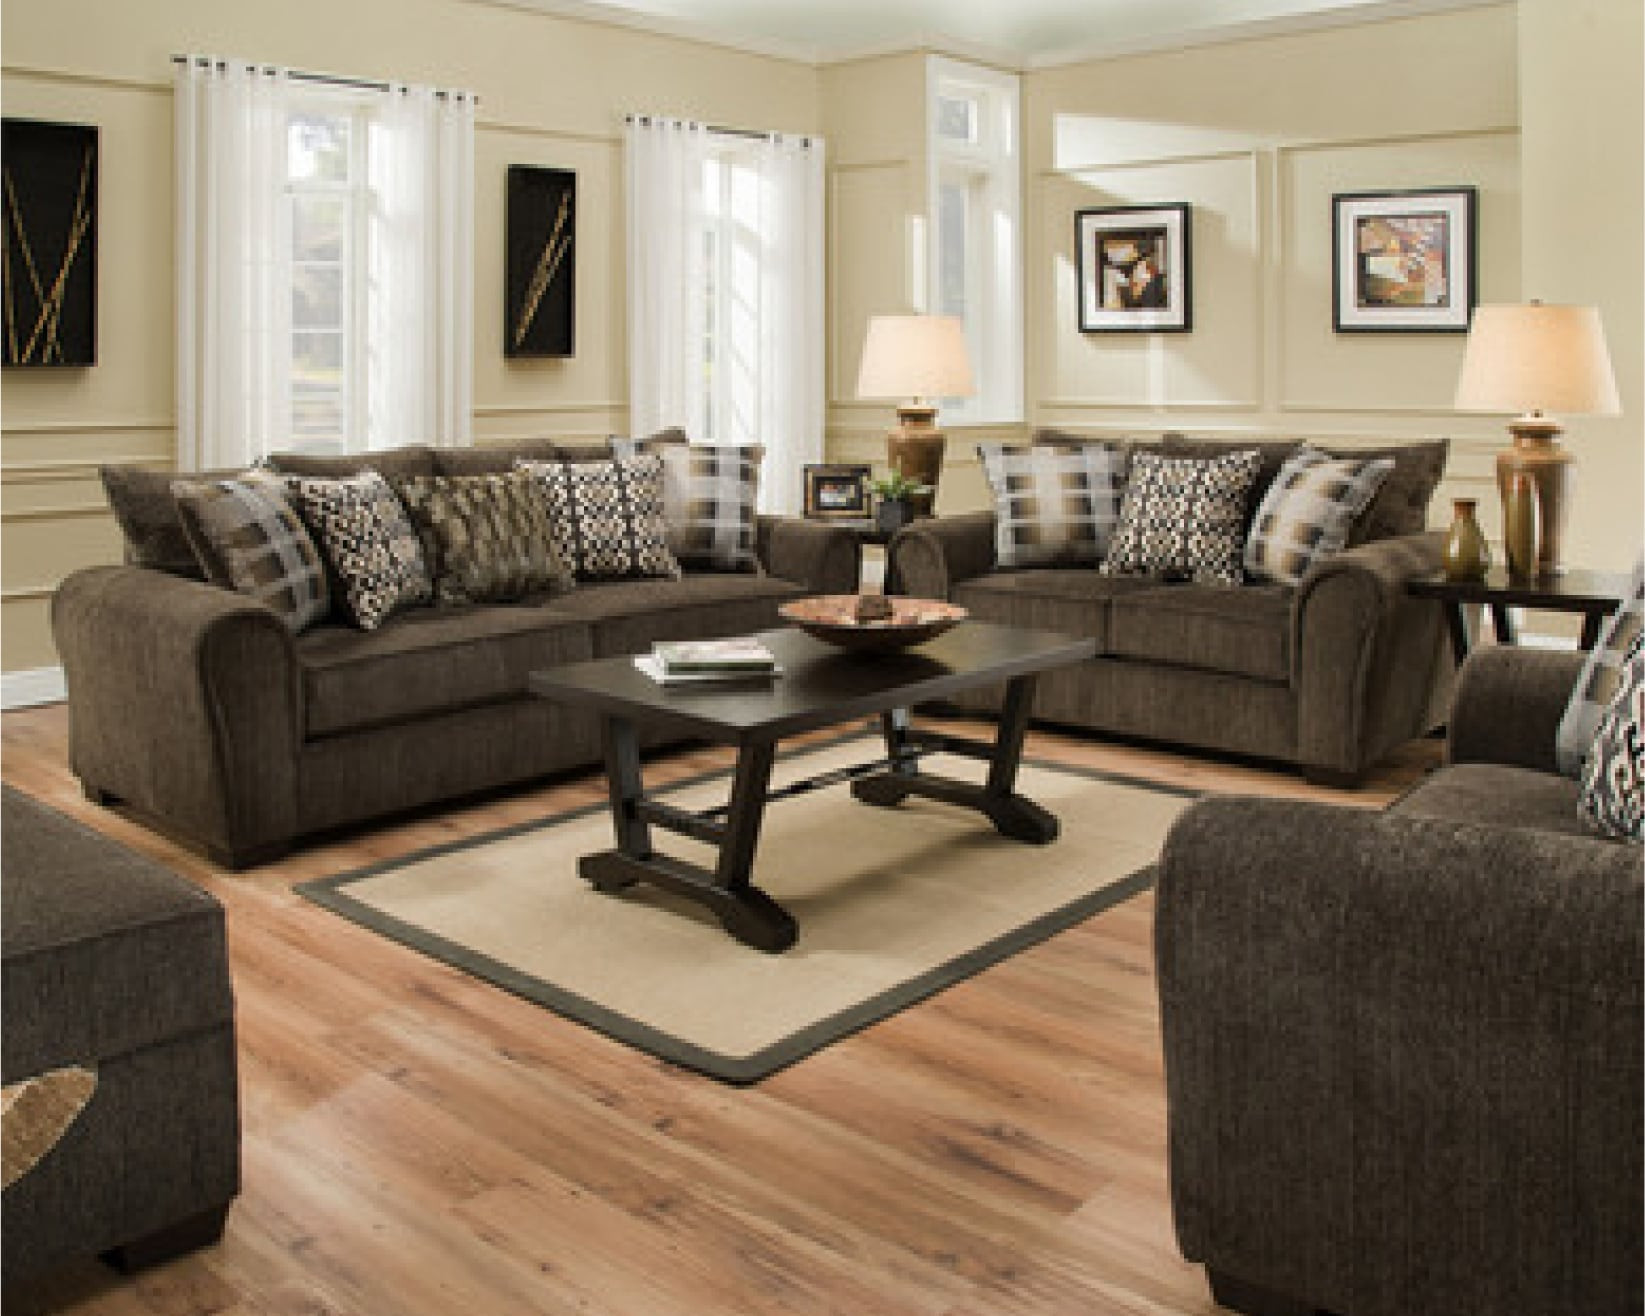 13 Stylish Hardwood Flooring Shelby Nc 2024 free download hardwood flooring shelby nc of sofa page 4 of 5 davis home furniture asheville canton pertaining to parks simmons living room furniture set available at davis home furniture in asheville nc